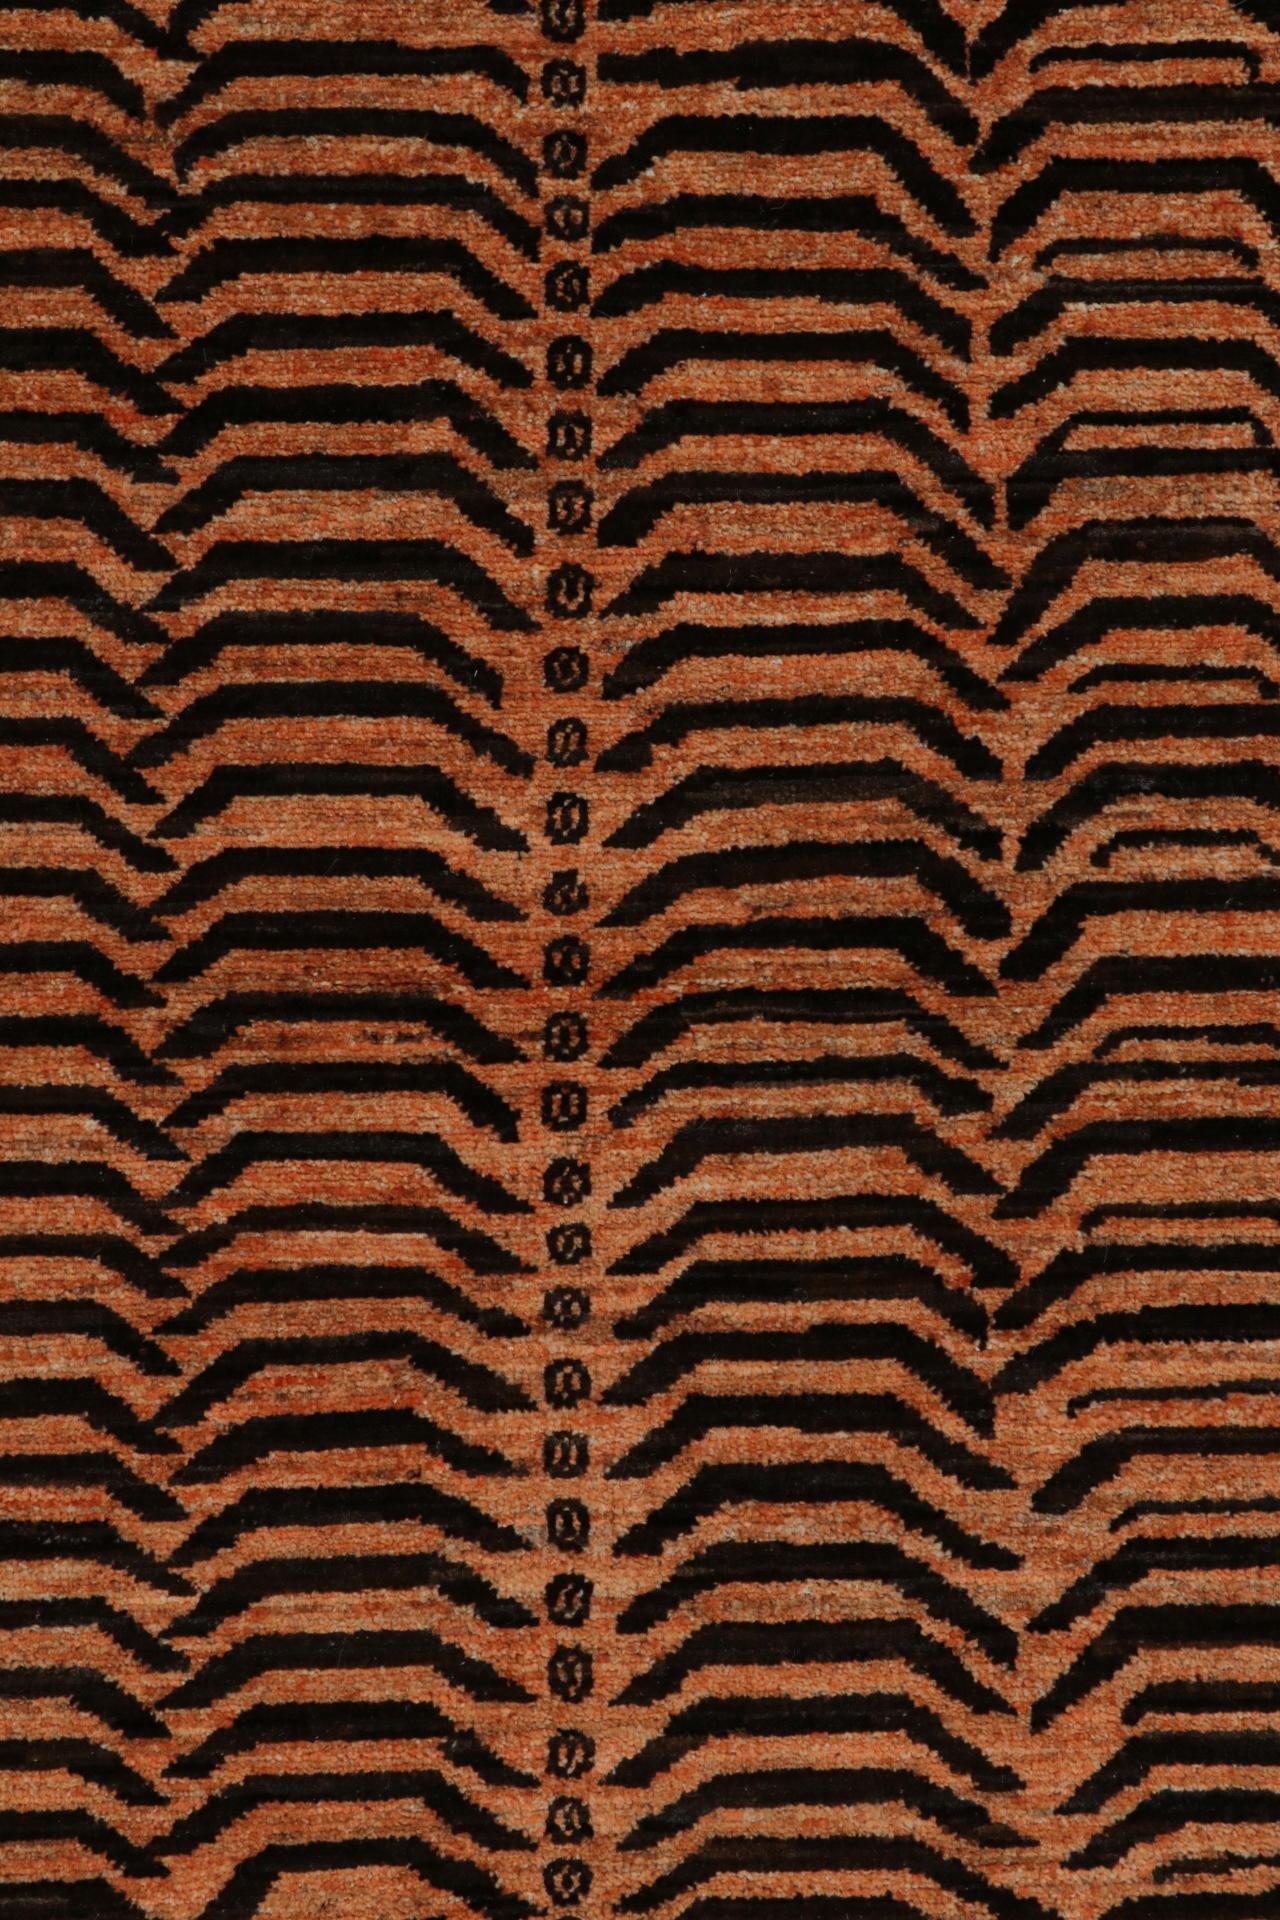 Contemporary Rug & Kilim’s Tiger Runner Rug in Orange with Brown Geometric Patterns For Sale